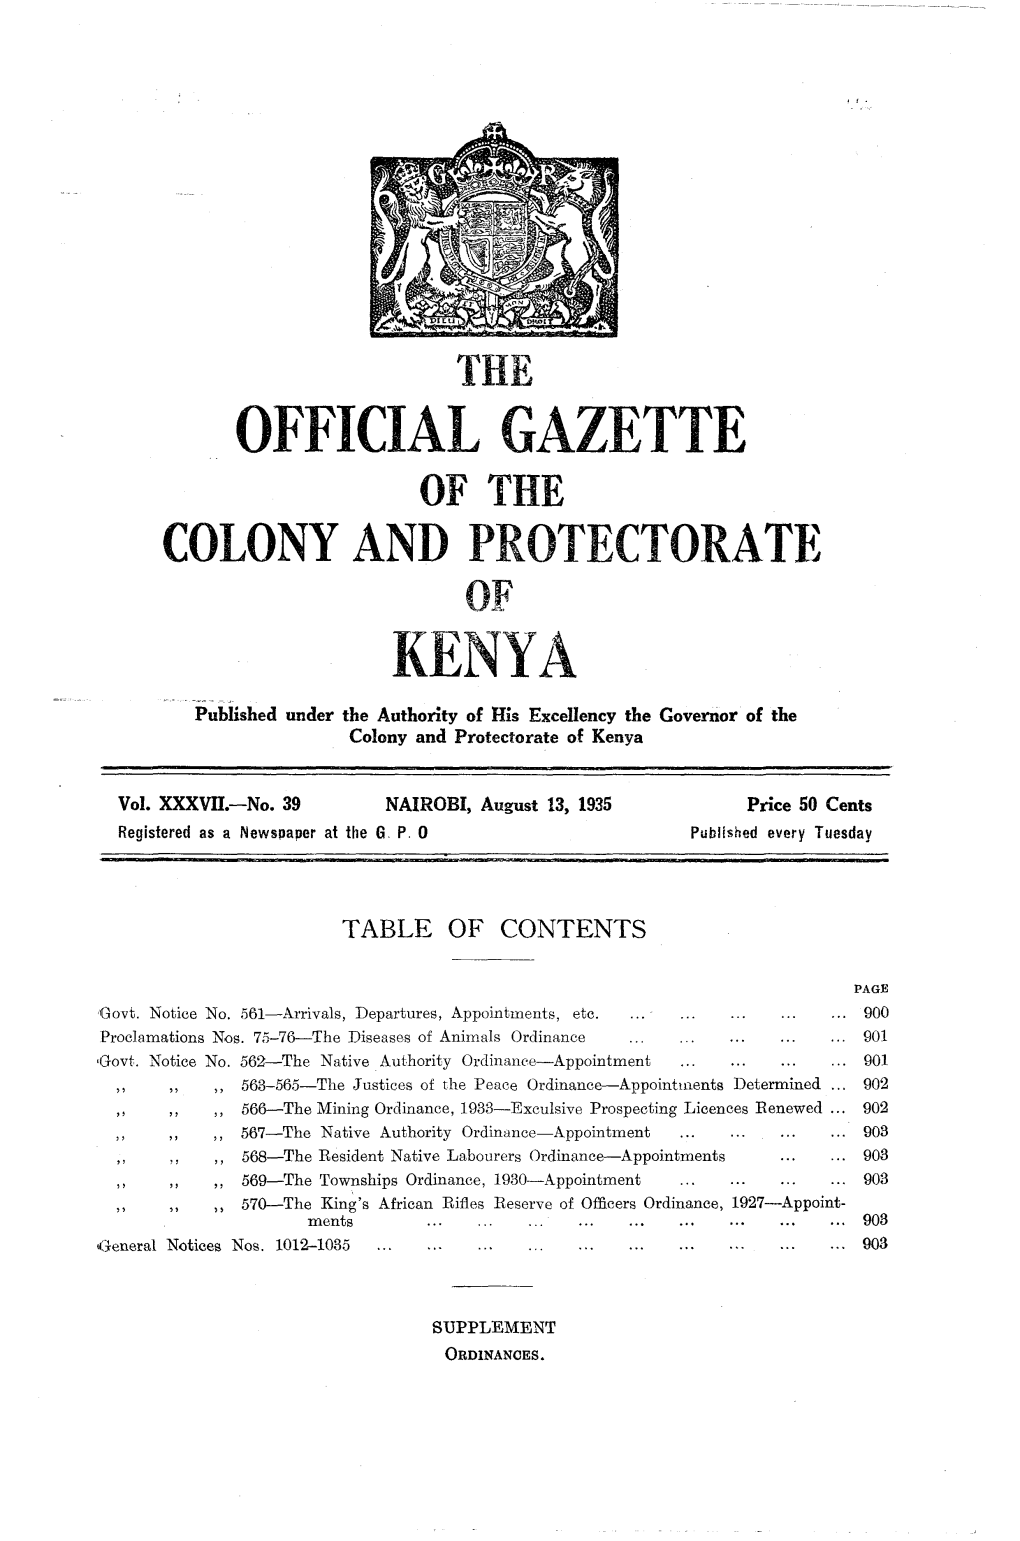 AL GAZETTE COLONY and PROTECTORATE KENYA Published Under the Authority of His Excellency the Governor of the Colony and Protectorate of Kenya